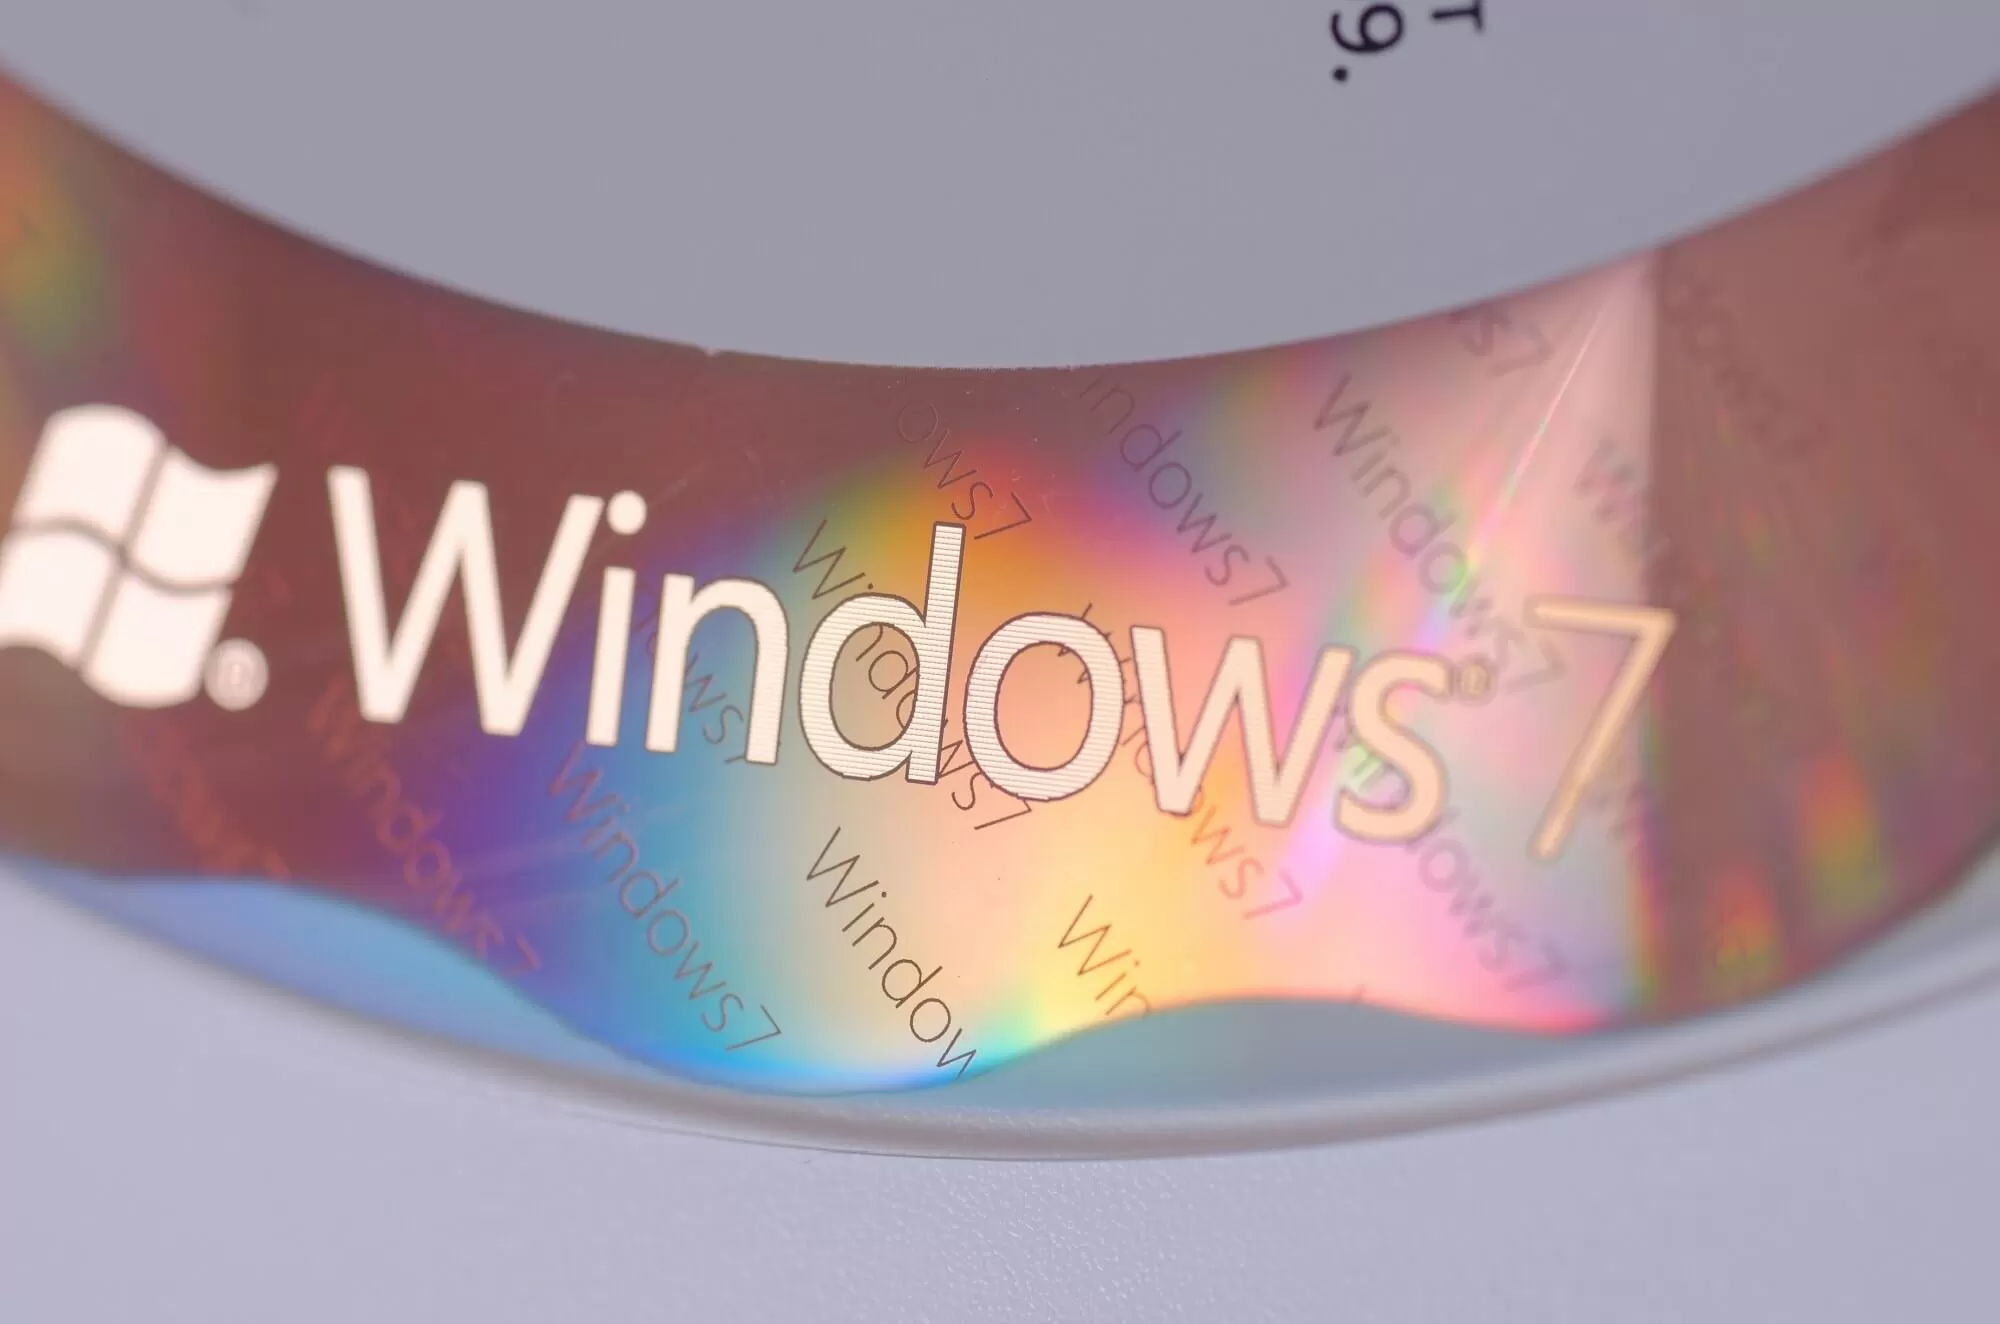 Microsoft issuing free Windows 7 fix after introducing bug in final updates